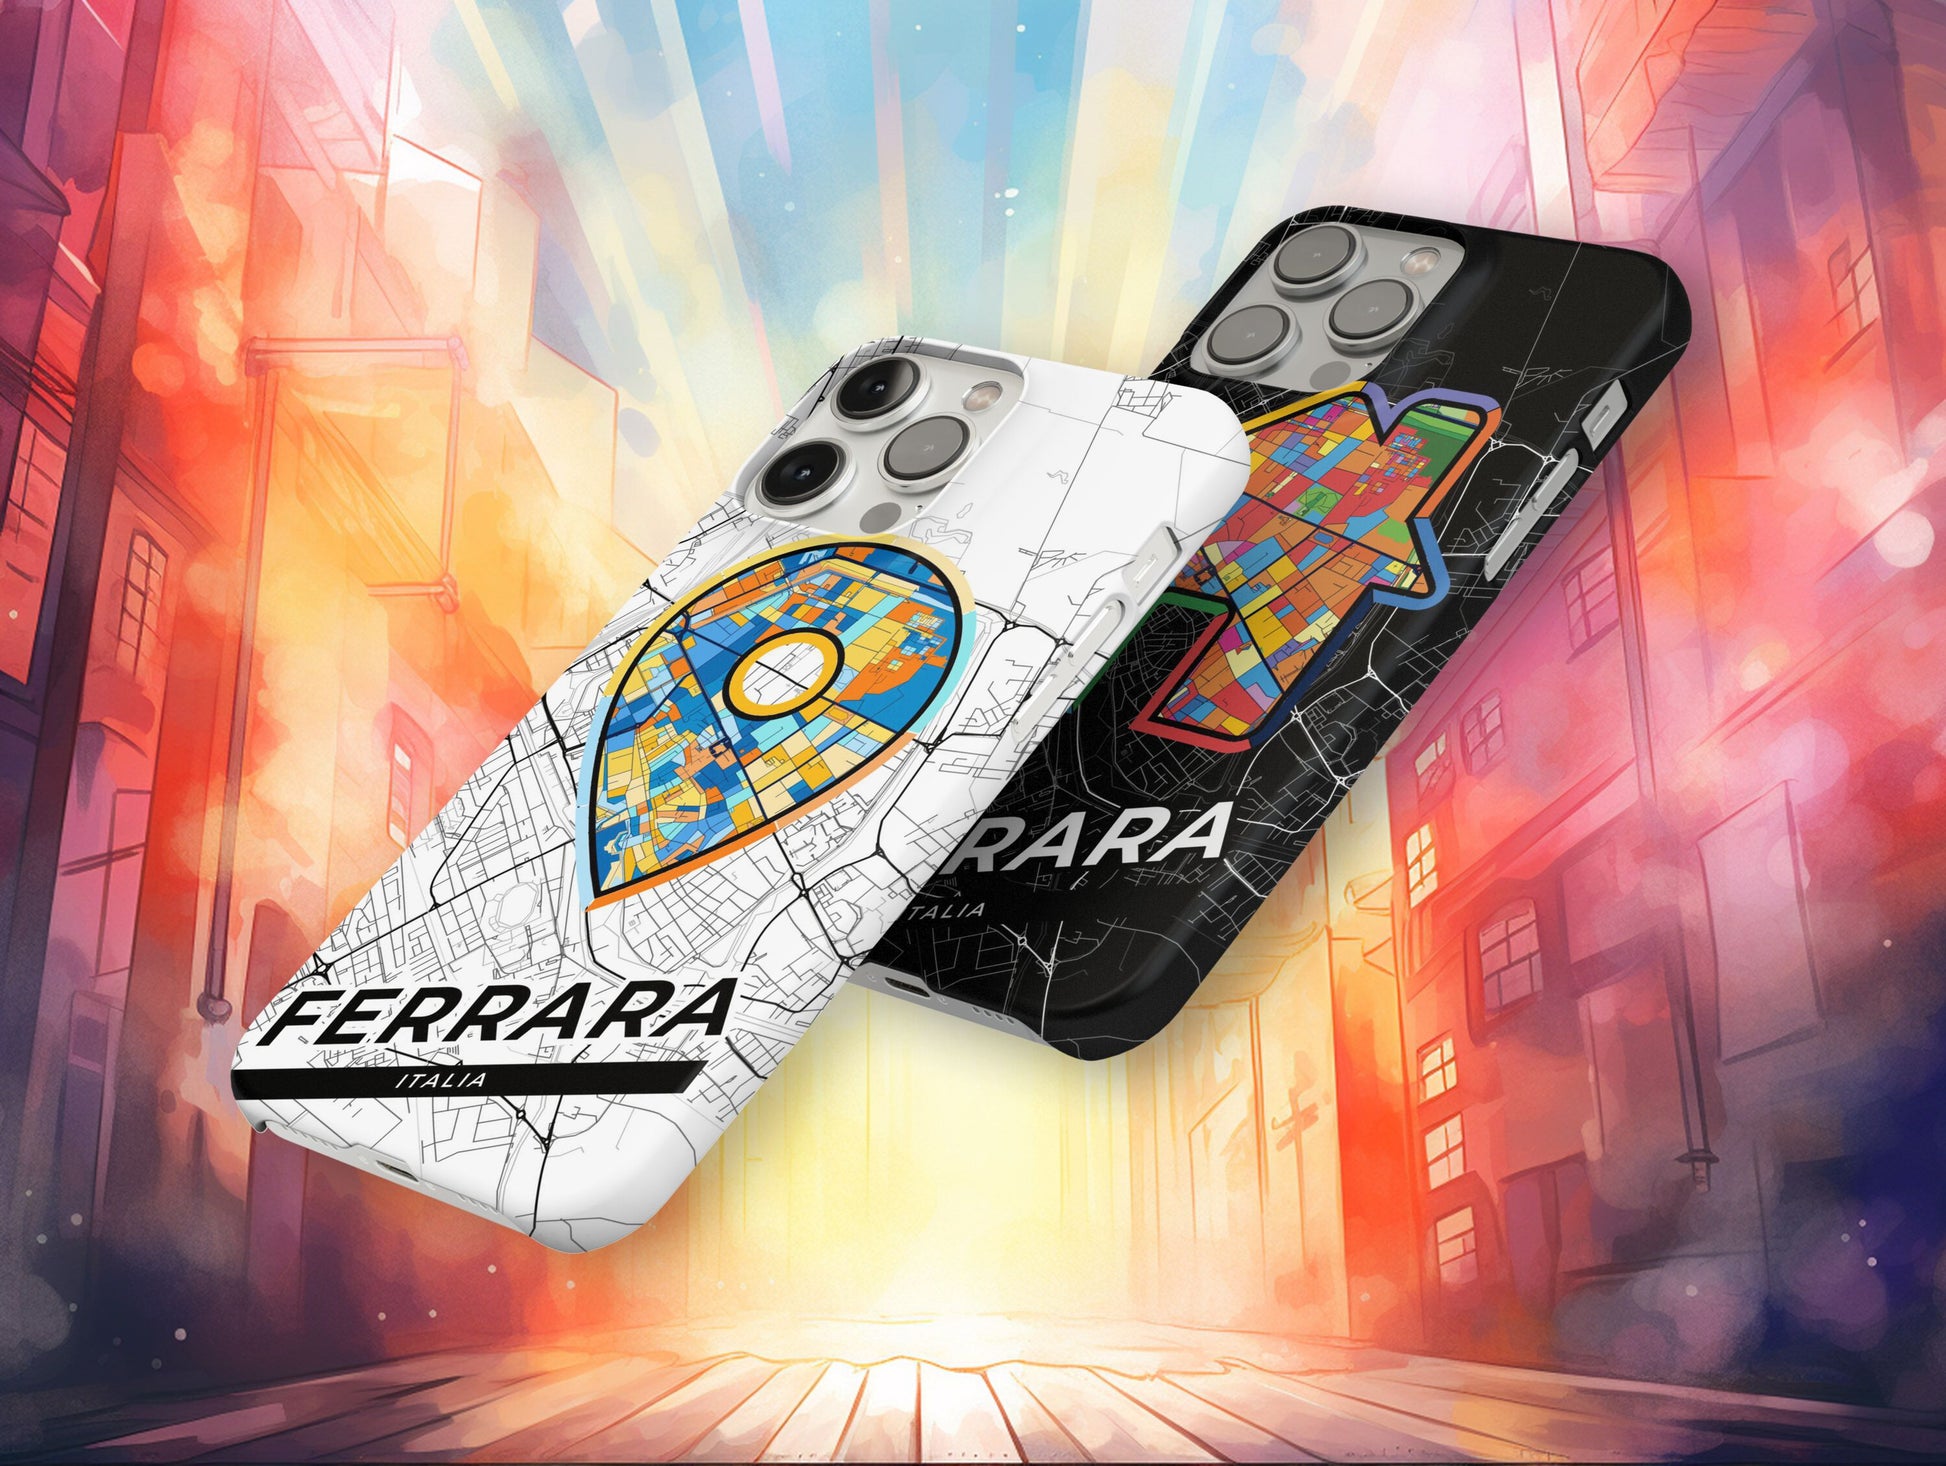 Ferrara Italy slim phone case with colorful icon. Birthday, wedding or housewarming gift. Couple match cases.